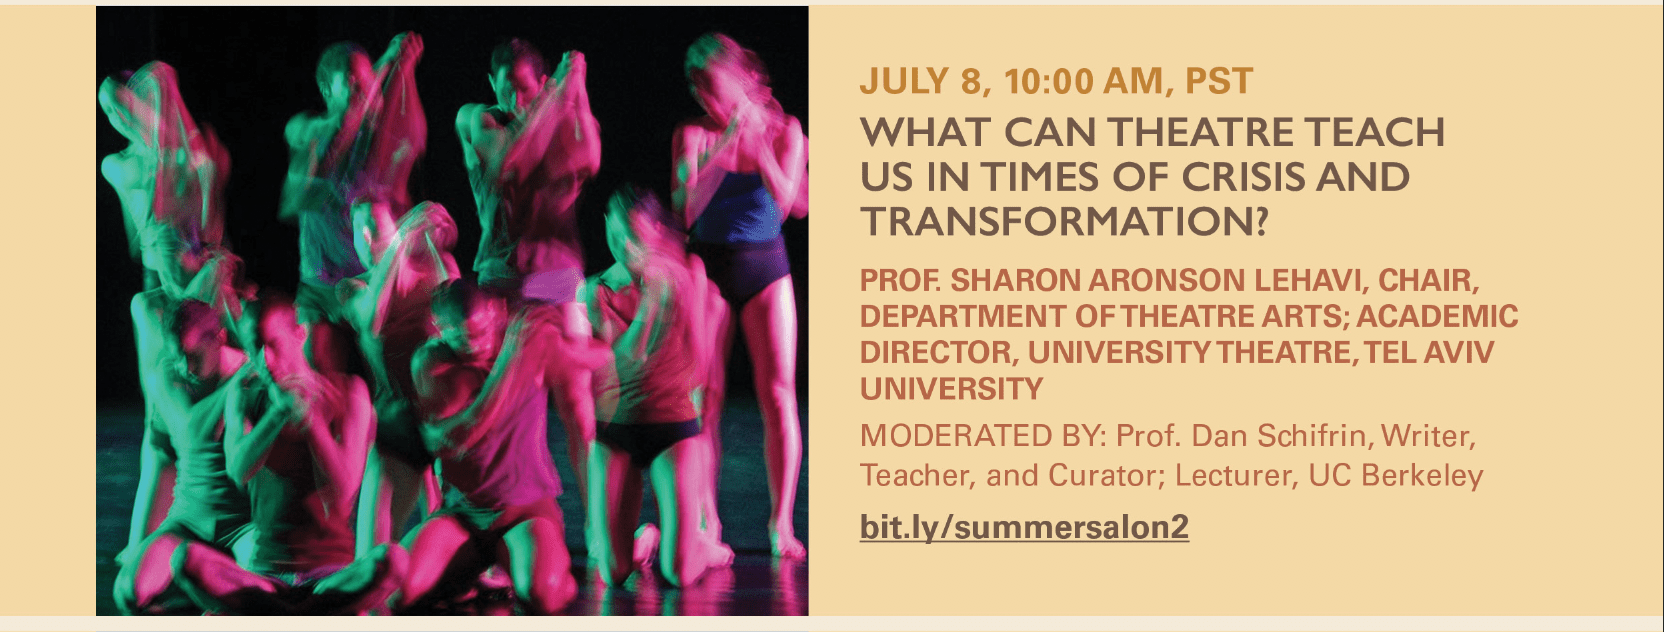 Summer Salon Series 2: What Can Theatre Teach Us in Times of Crisis and Transformation?